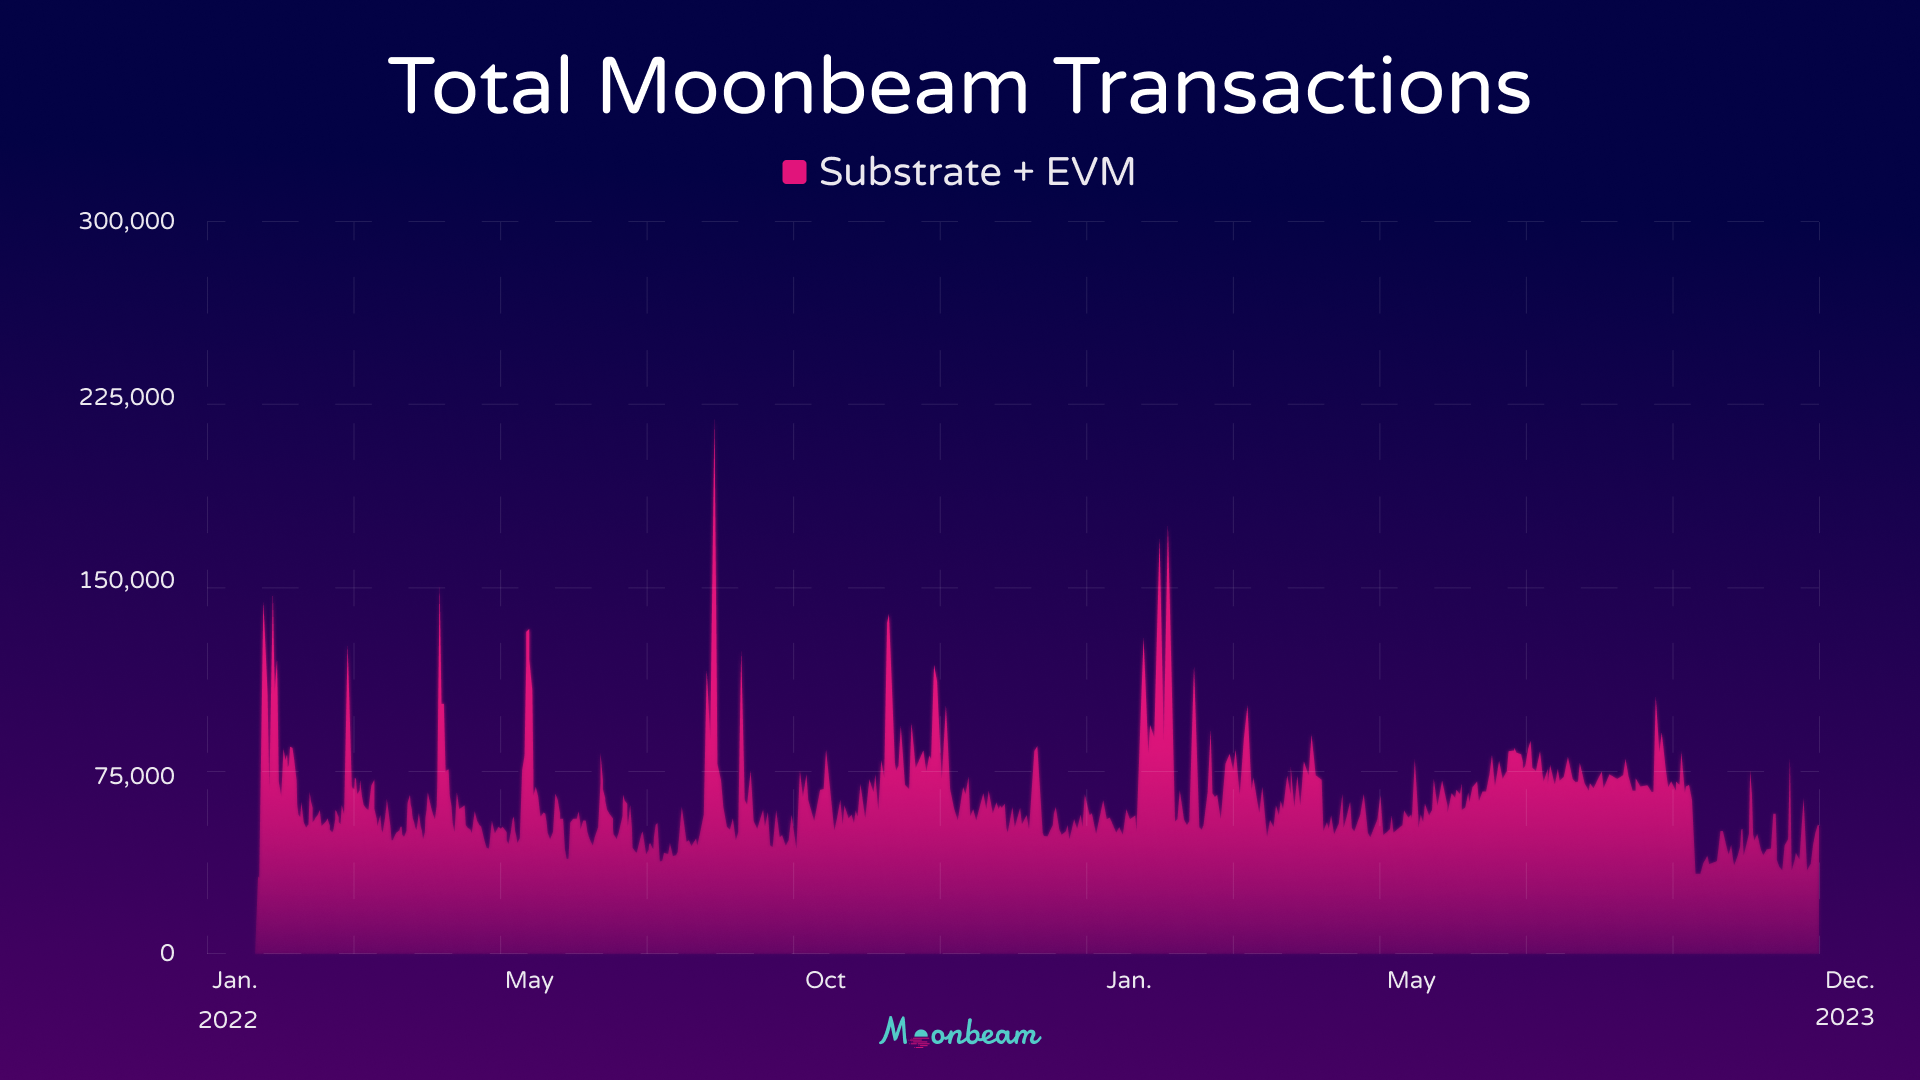 Graph of total Moonbeam transactions, illustrating the fluctuation and trends over the year 2022.